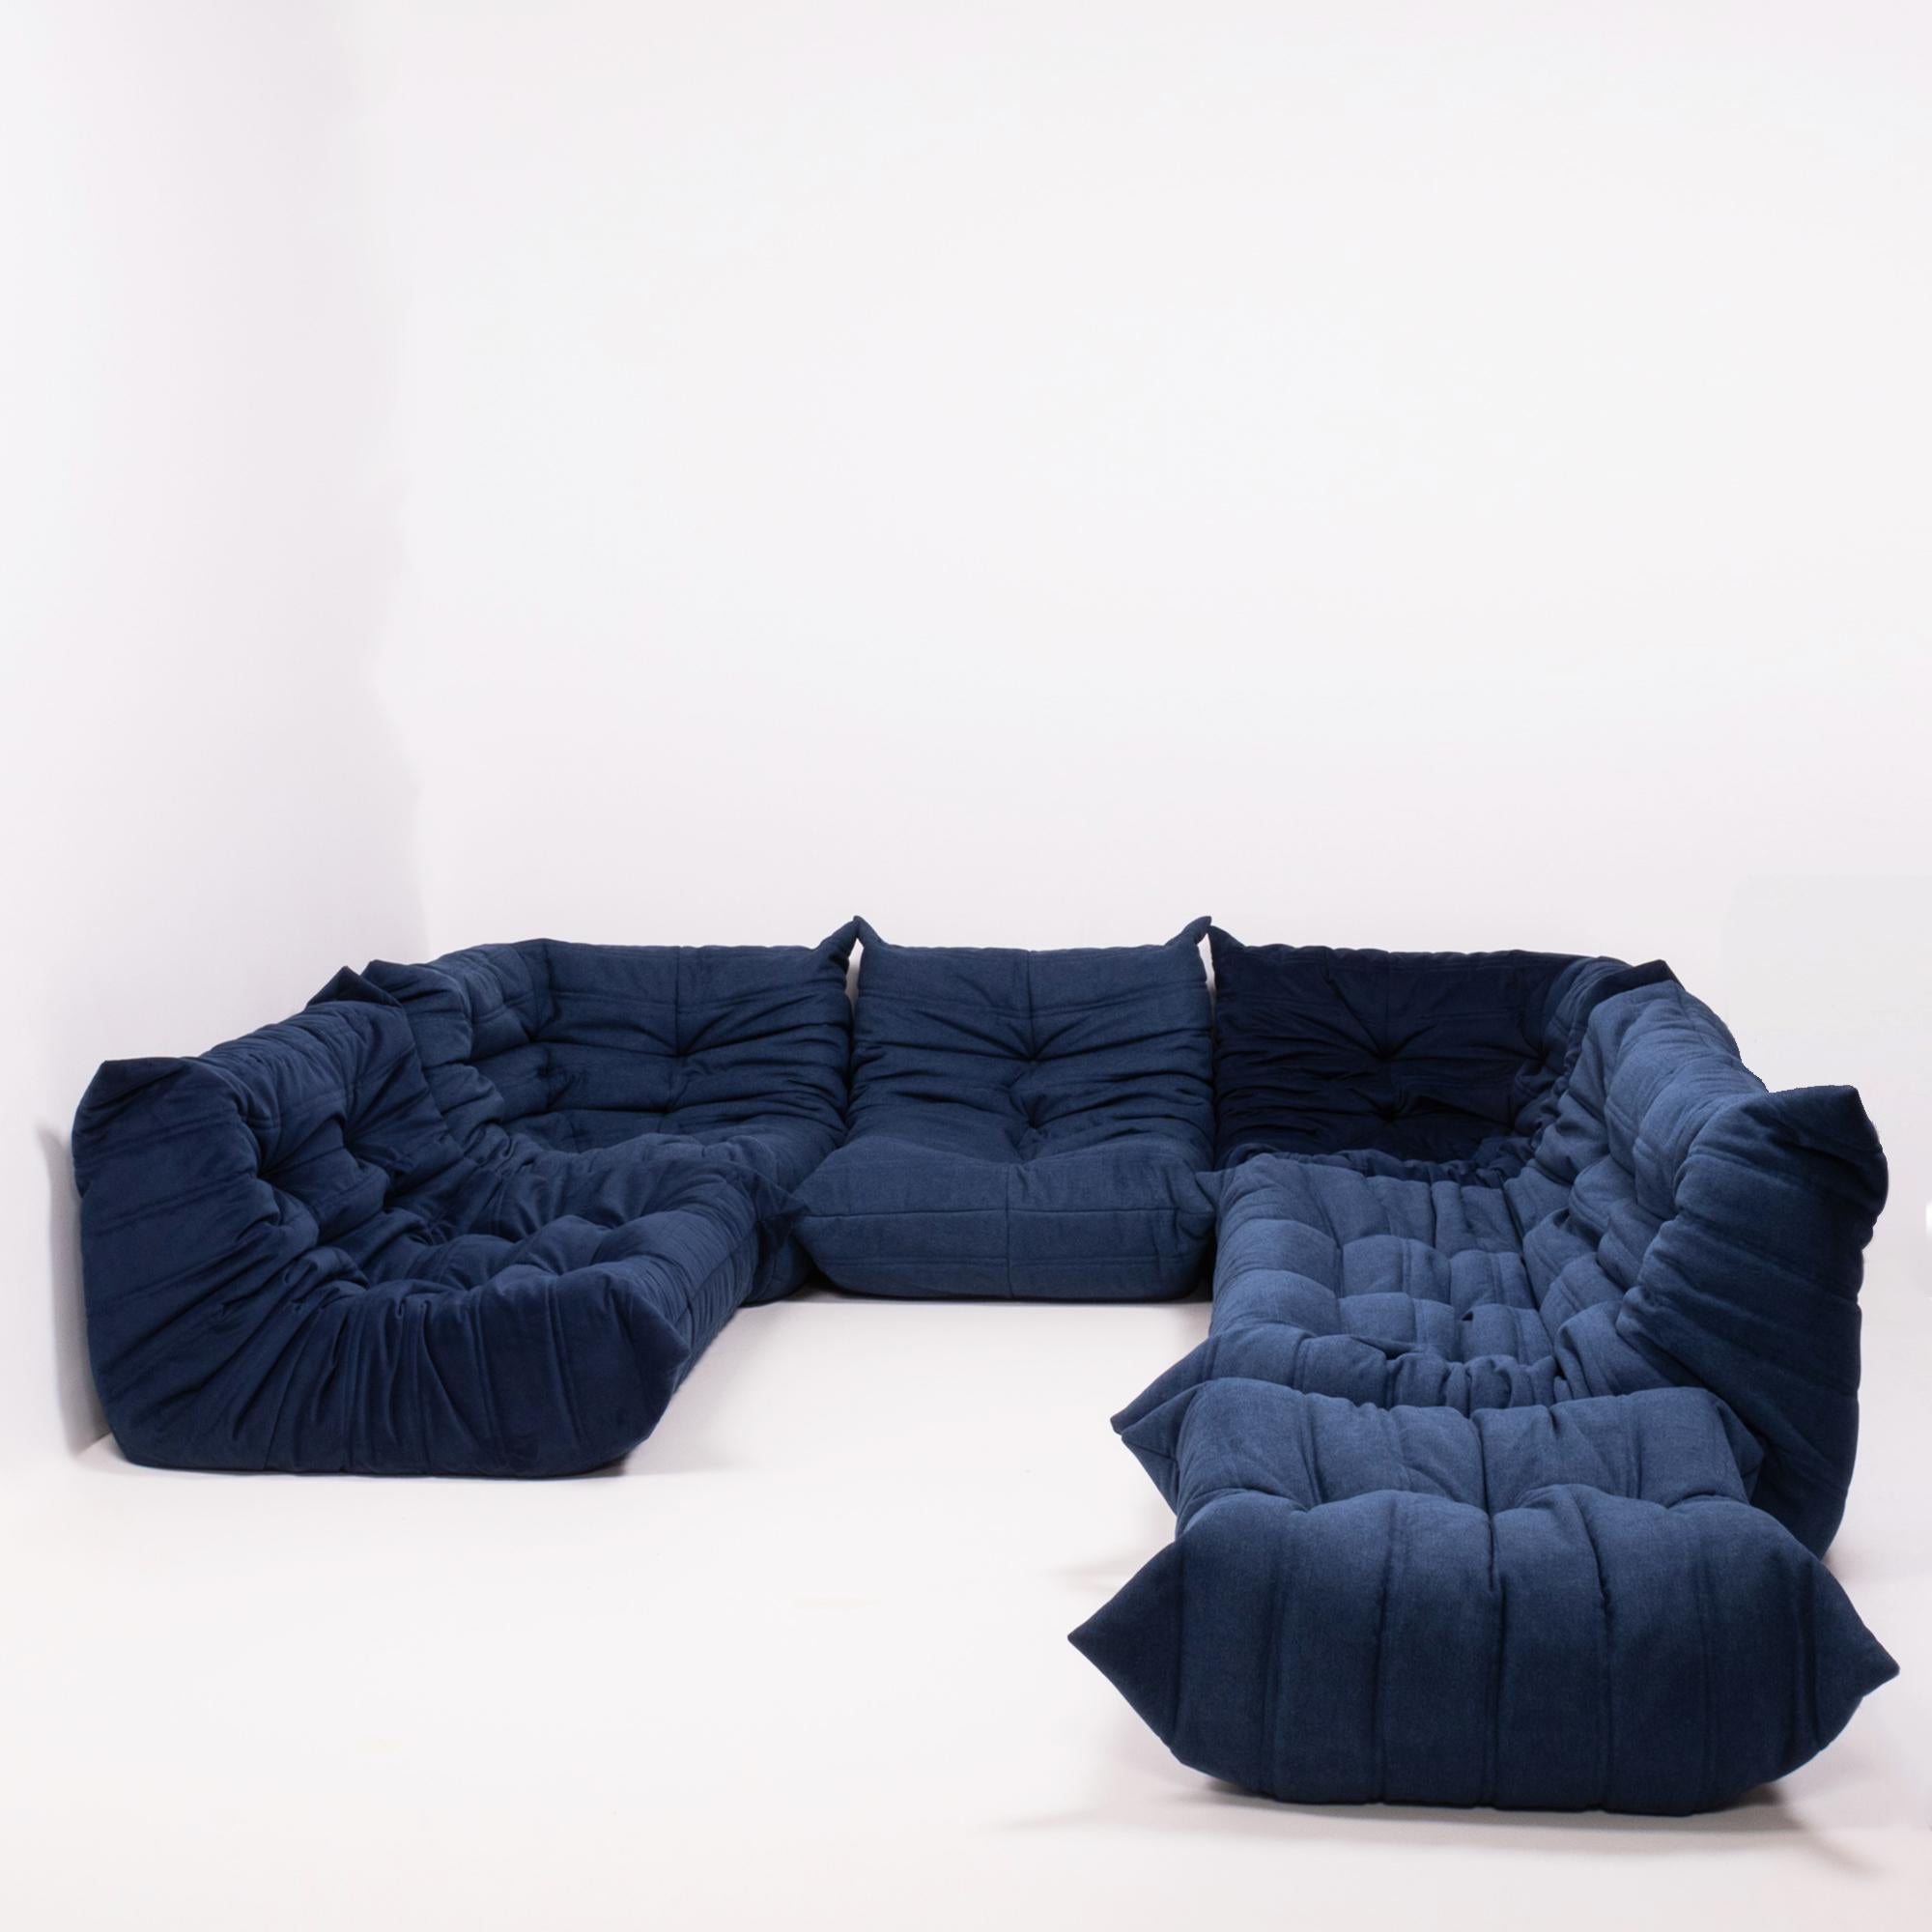 The iconic Togo sofa, originally designed by Michel Ducaroy for Ligne Roset in 1973, has become a design Classic.

This six-piece modular set is incredibly versatile and can be configured into one large corner sofa or split for a multitude of